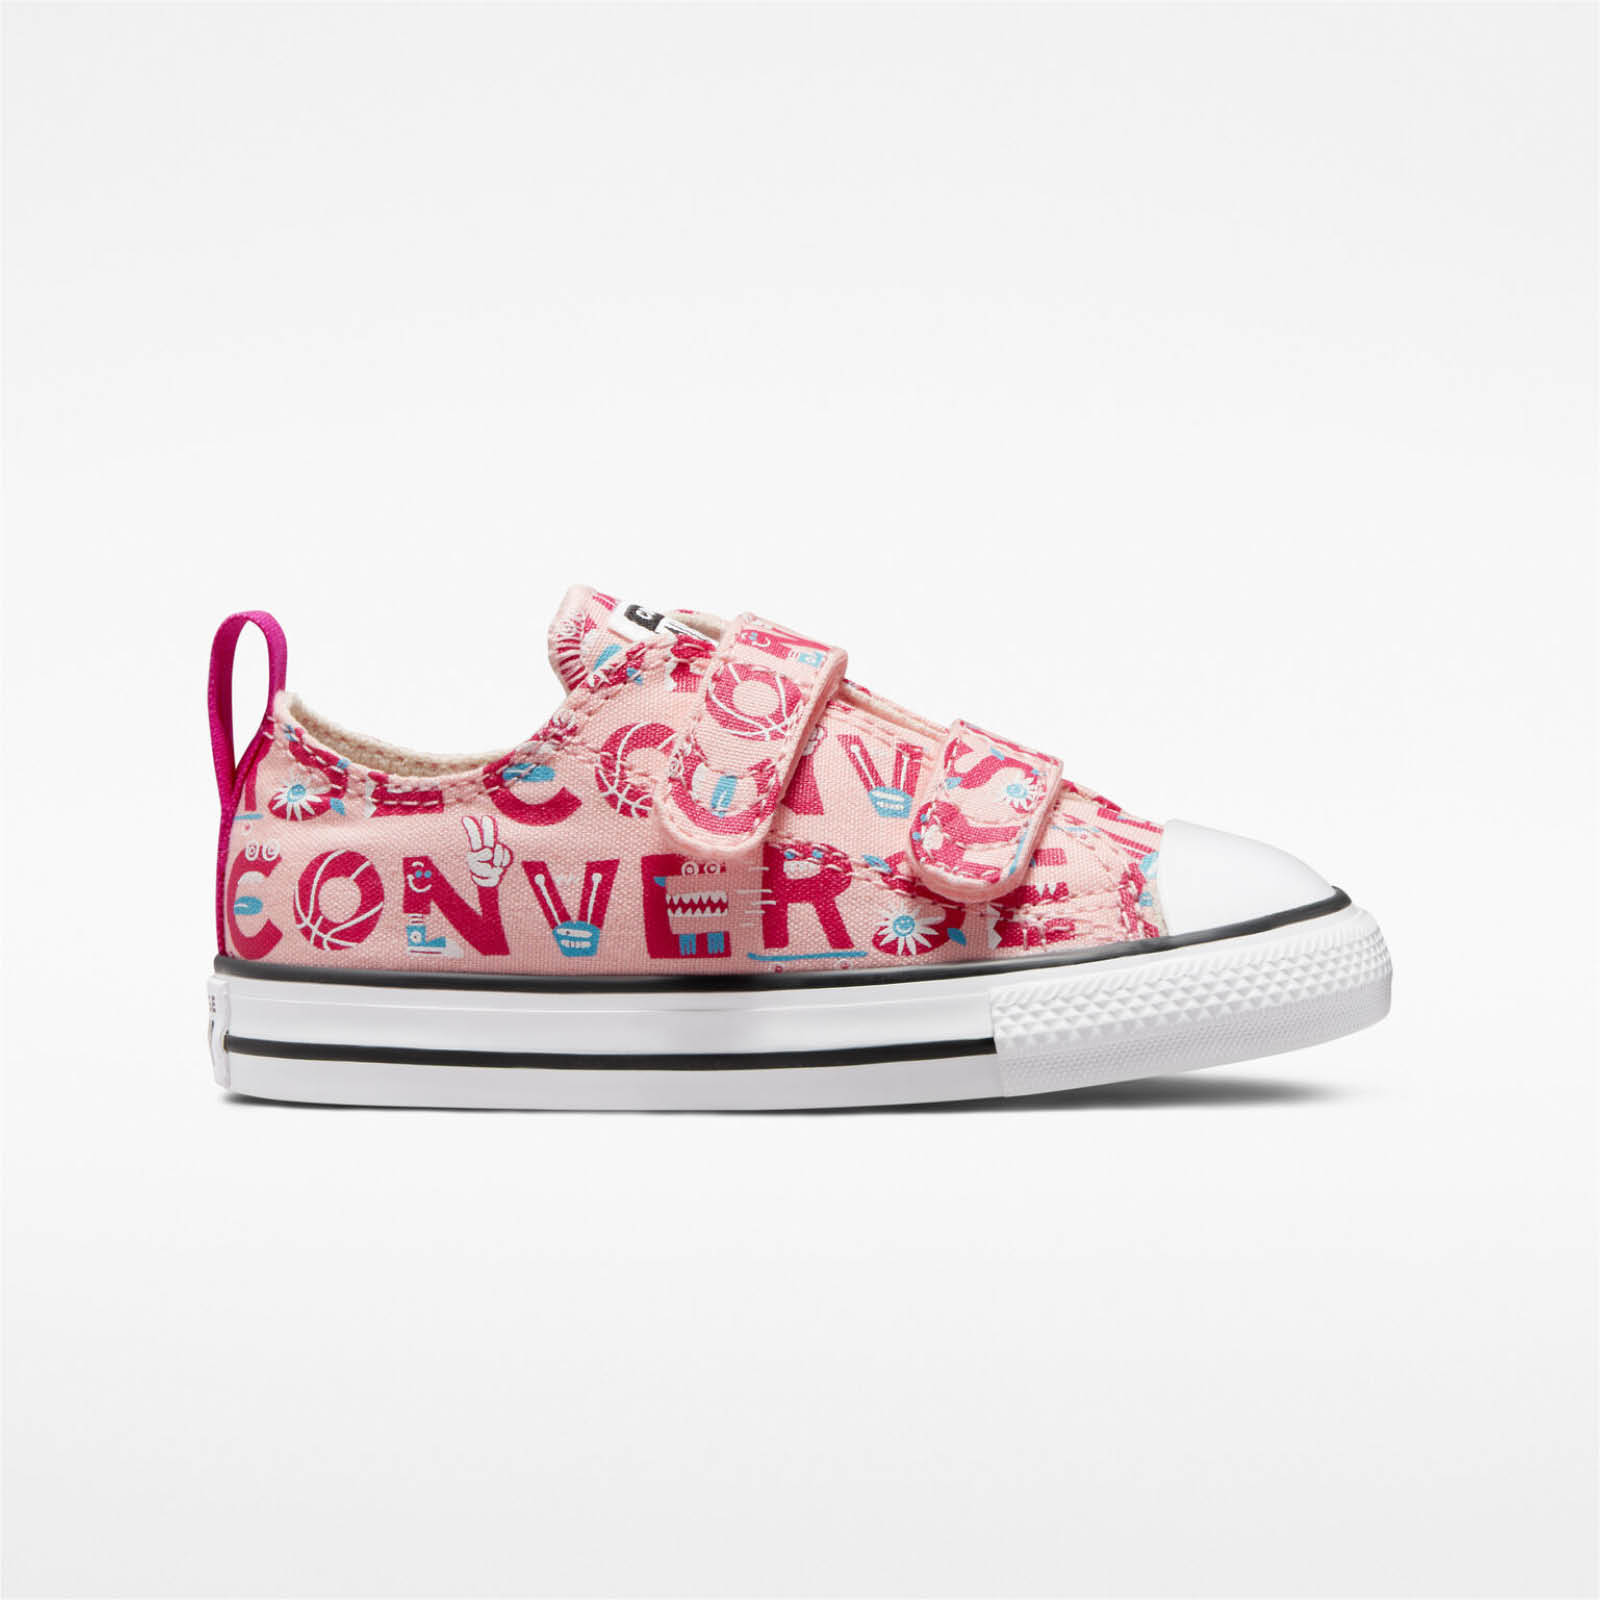 Converse - CHUCK TAYLOR ALL STAR 2V CREATURE FEATURE - 689-STORM PINK/NATURAL IVORY Παιδικά > Παπούτσια > Sneaker > Παπούτσι Low Cut